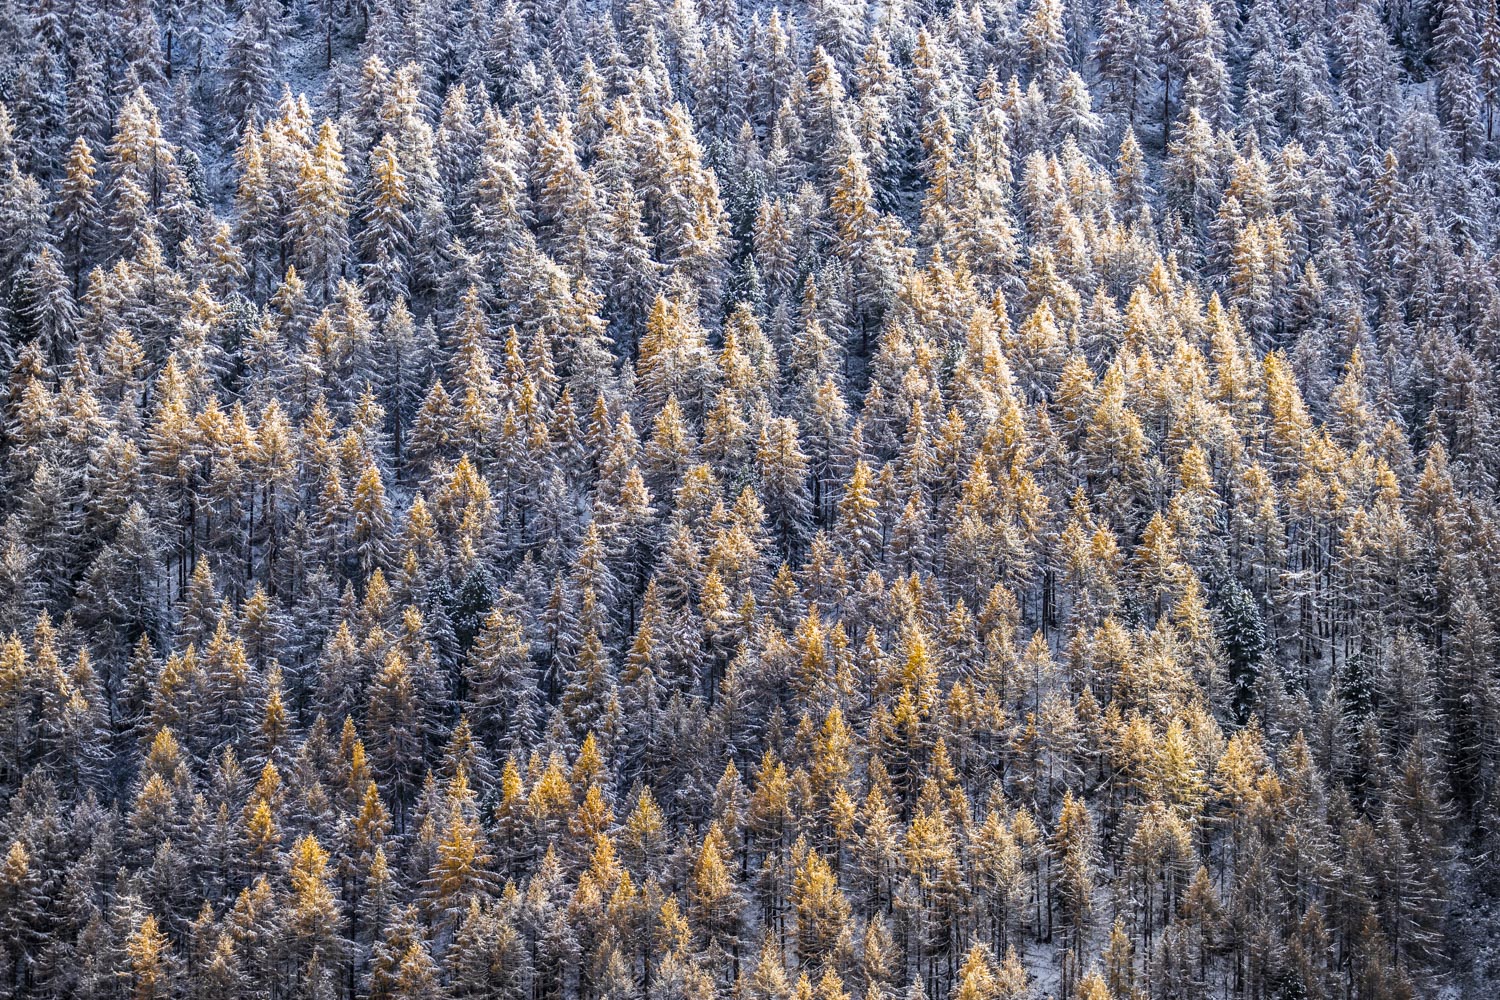 Solaise forest - Fall Colors - Larch Trees - Val d'IsÃ¨re